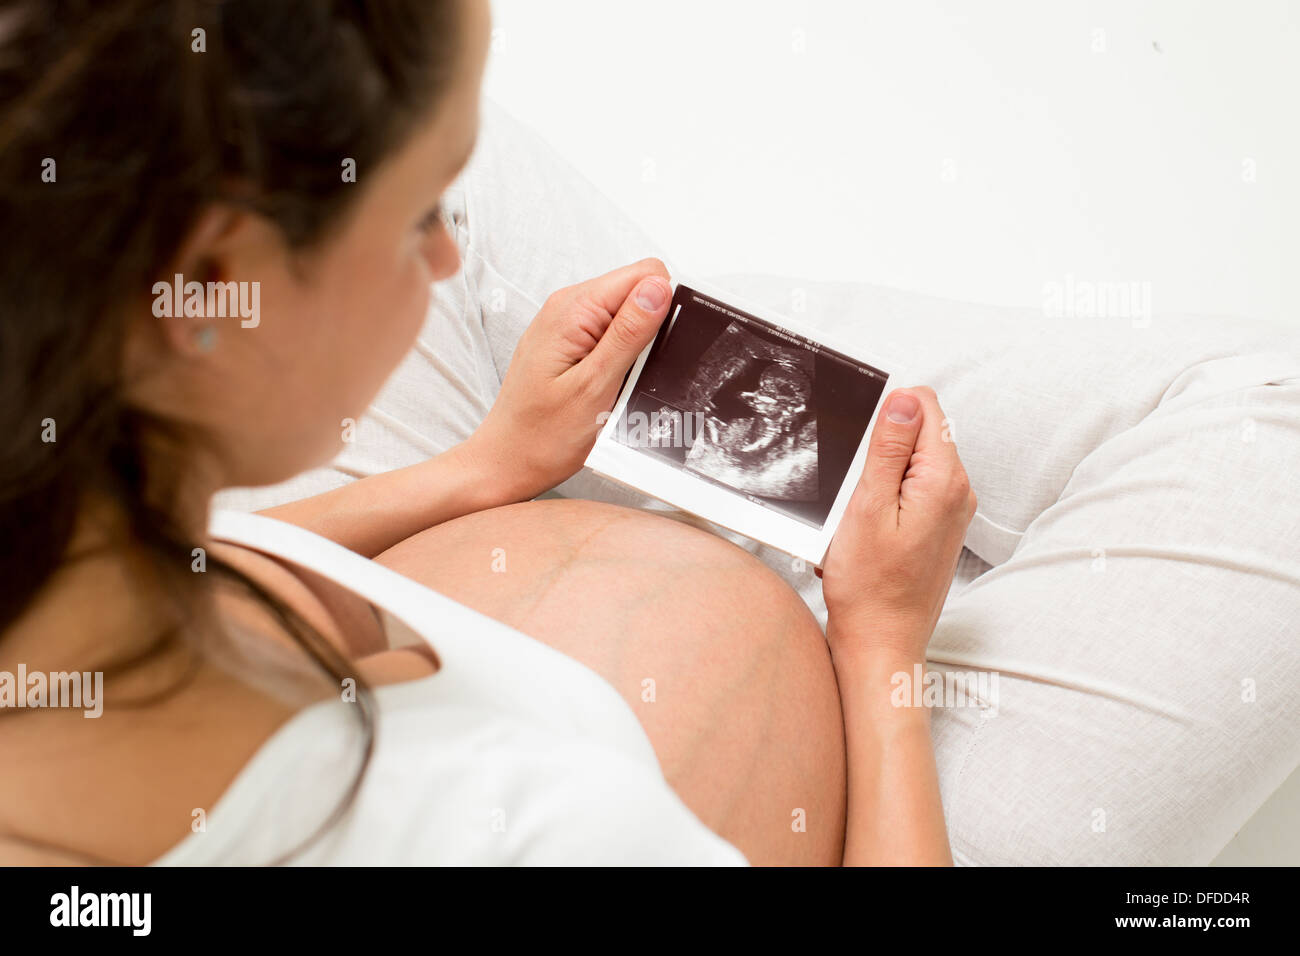 Pregnant woman looking at baby ultrasound scan Stock Photo